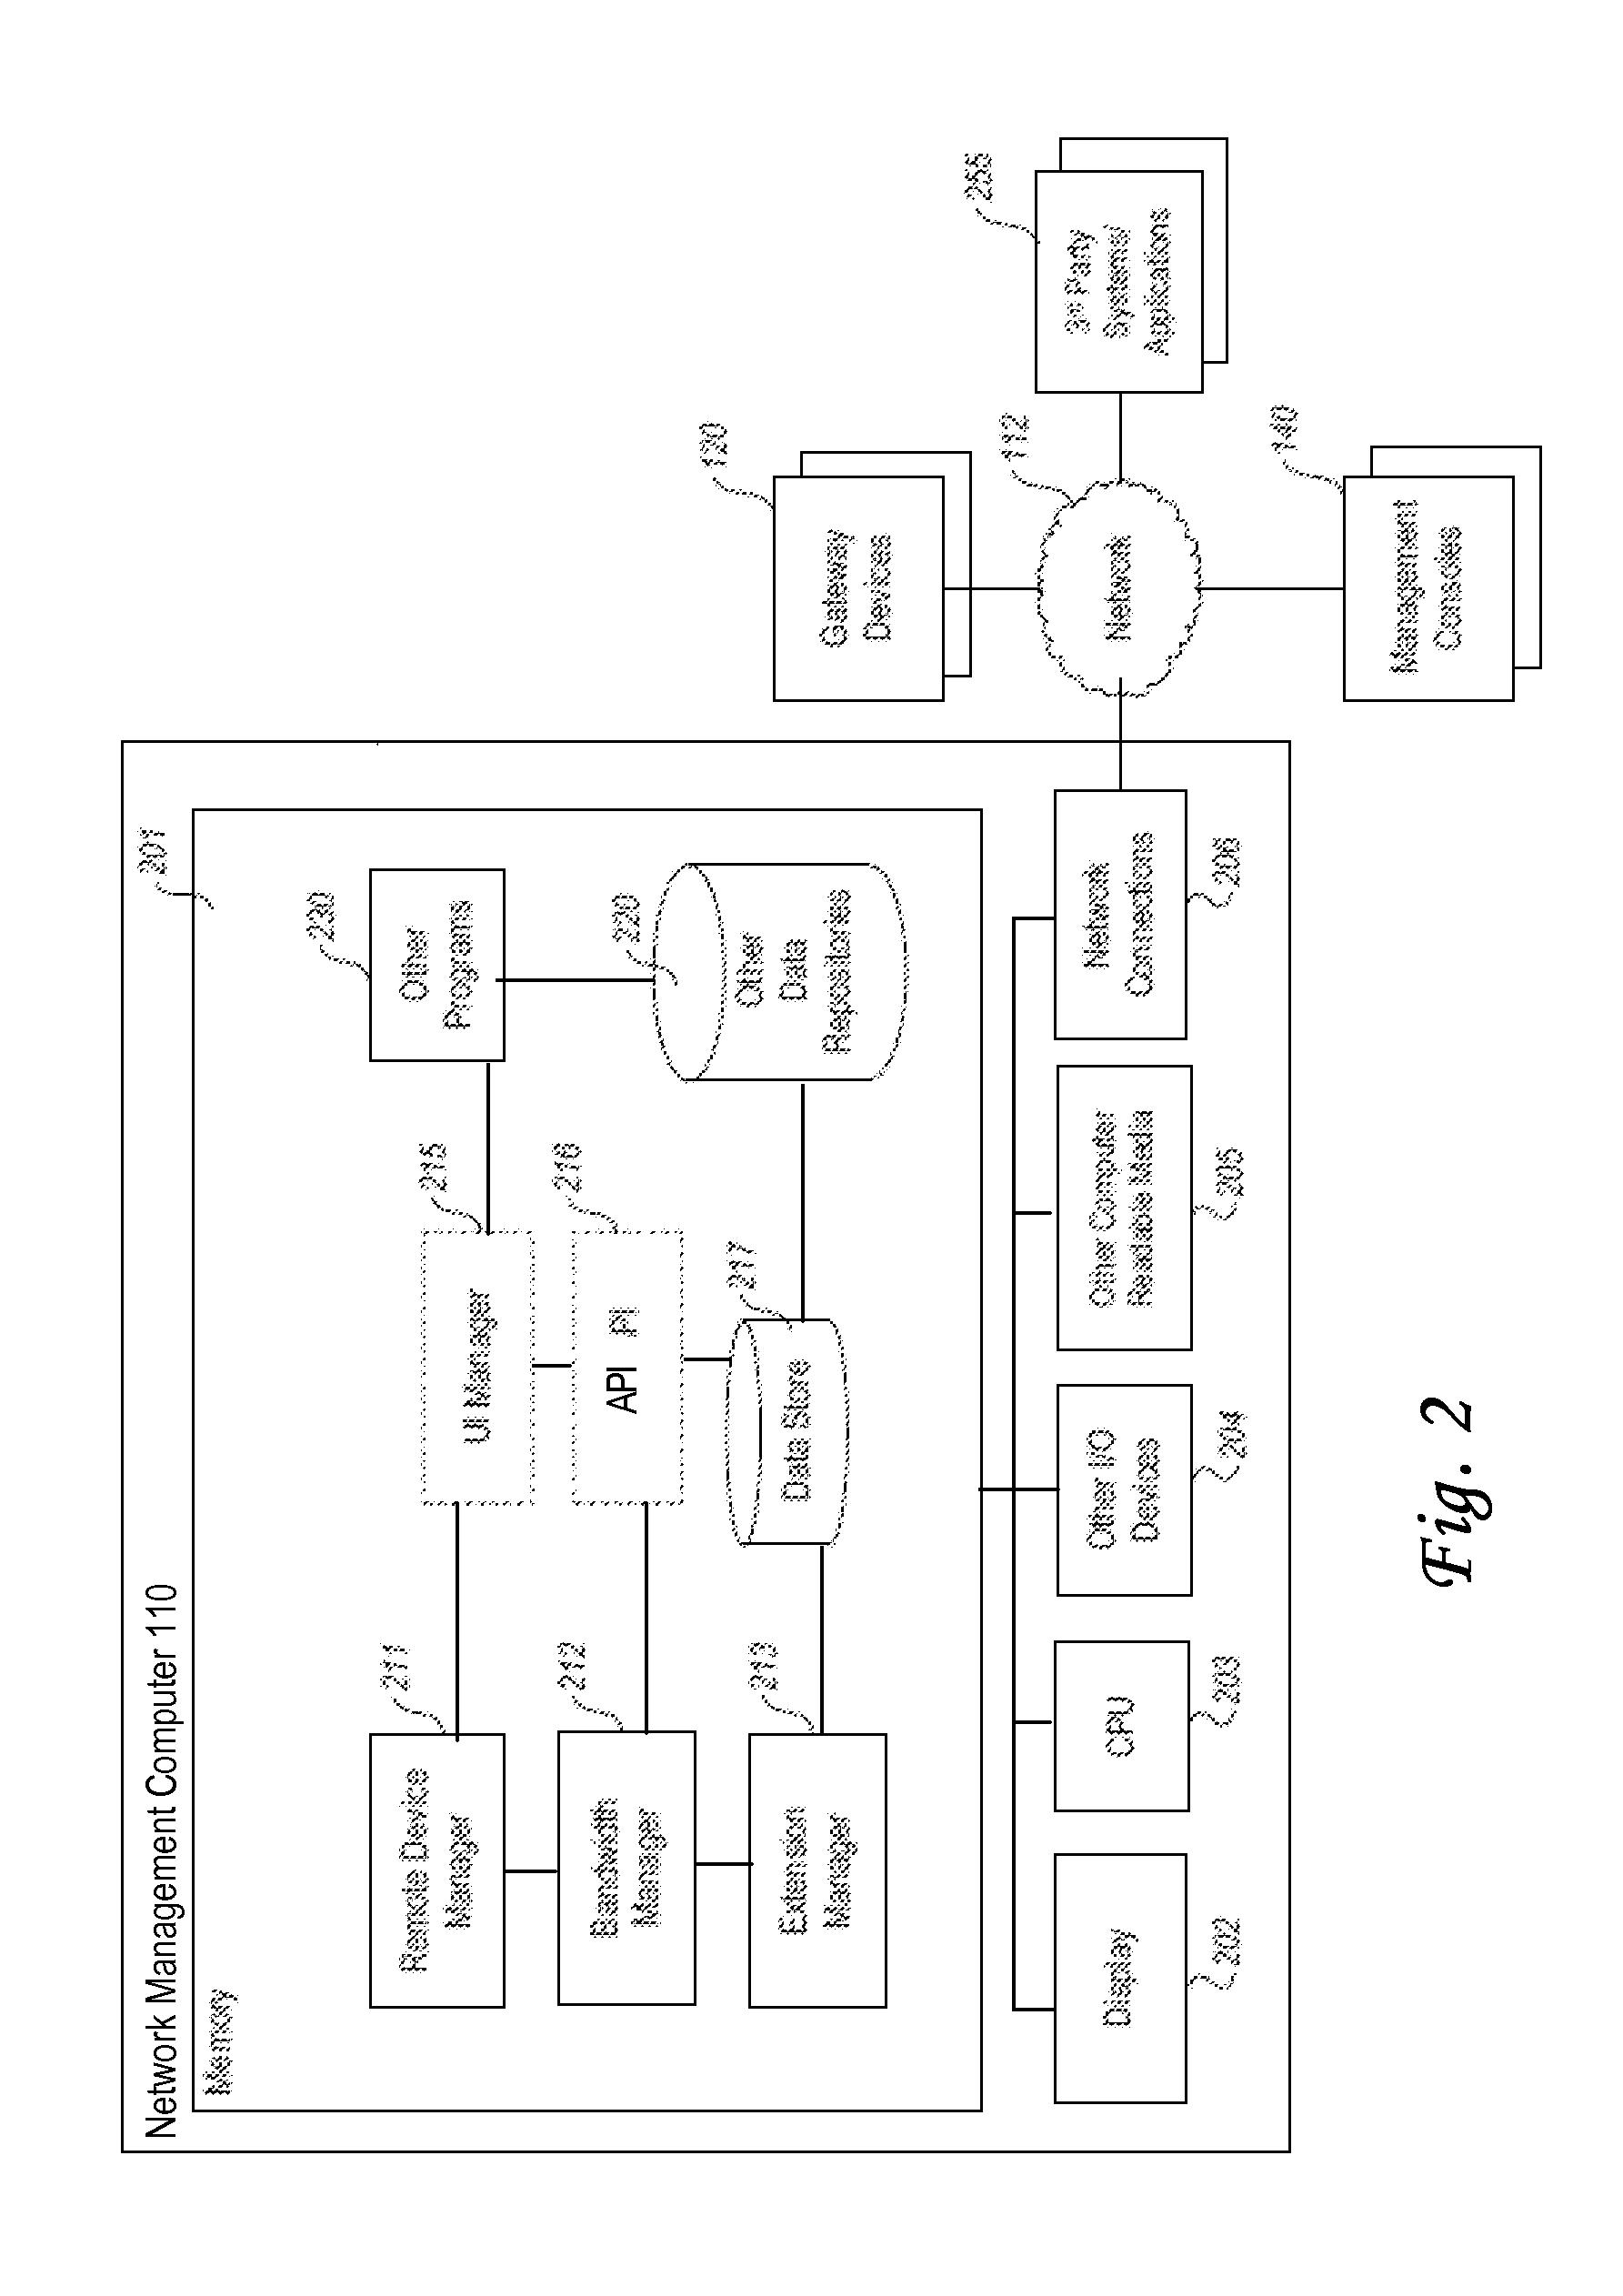 Remote monitoring and controlling of network utilization